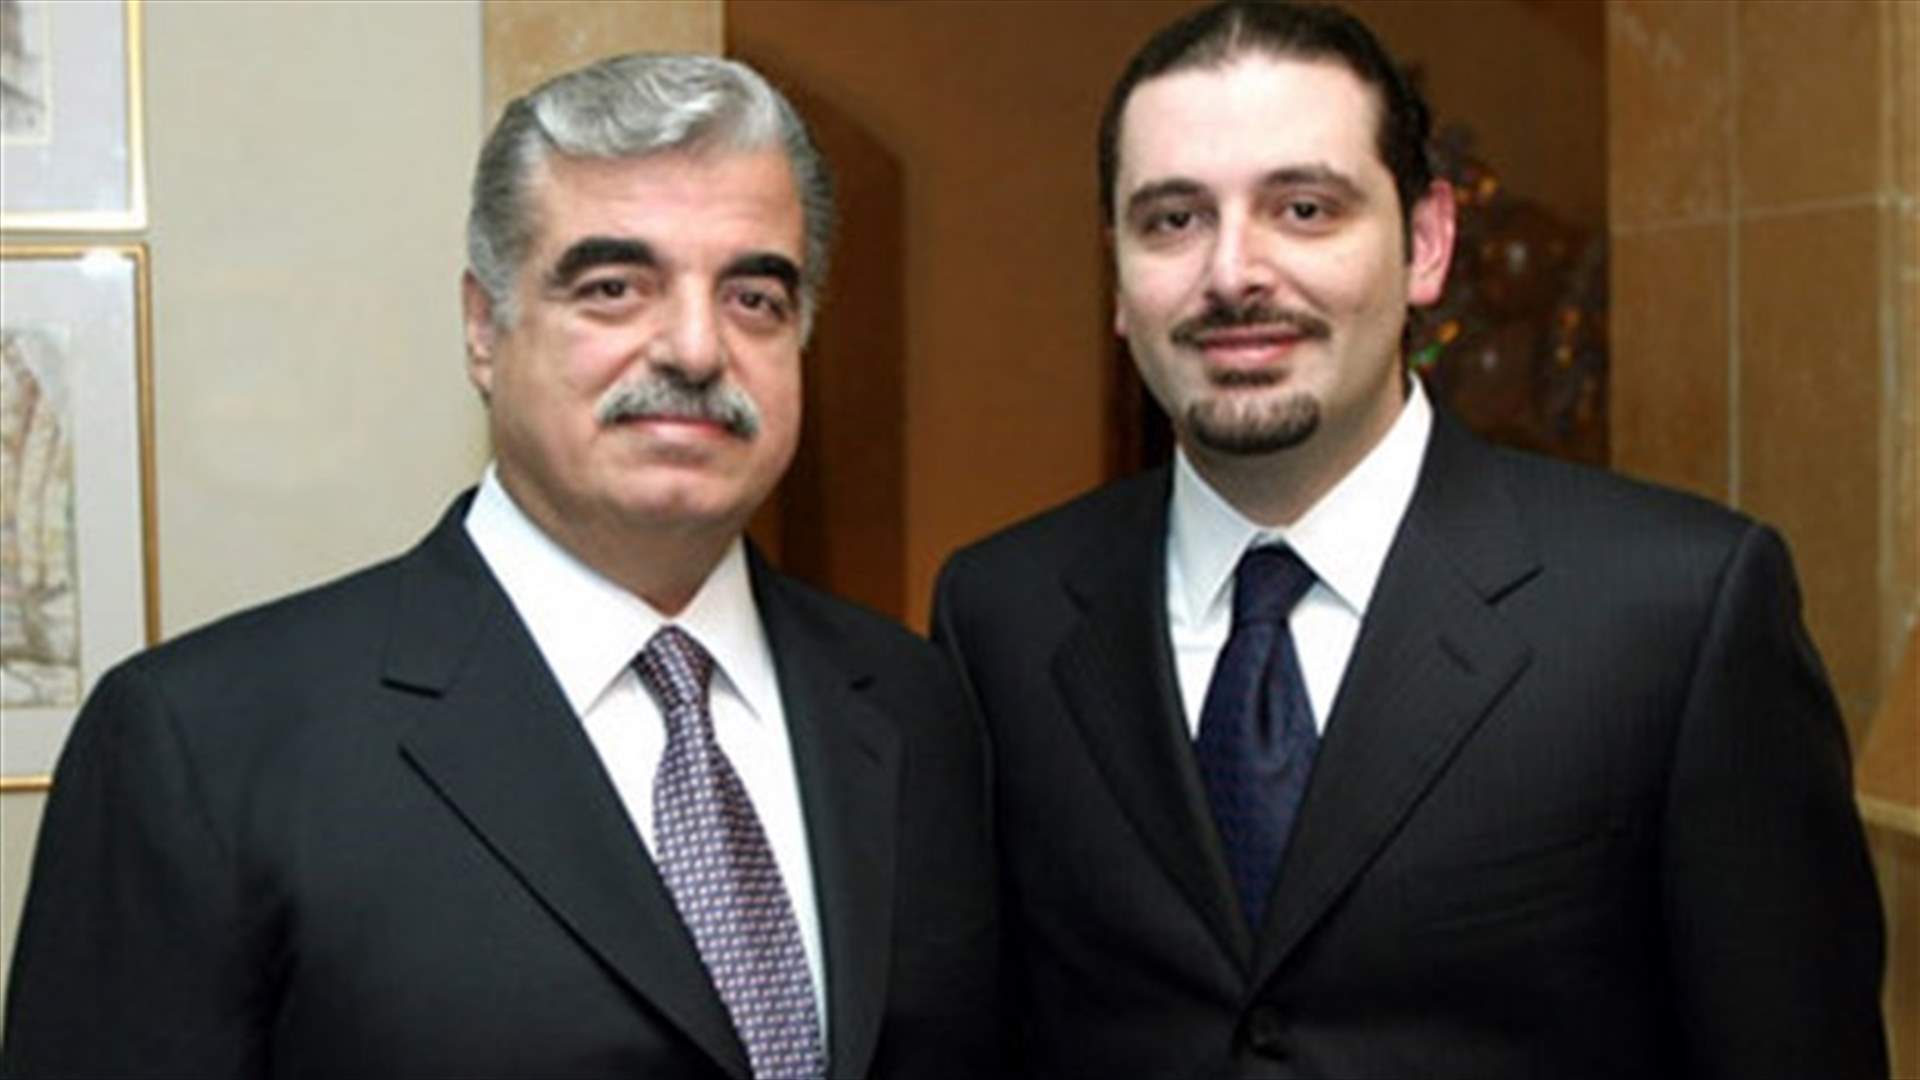 PM Hariri: I know who assassinated my father